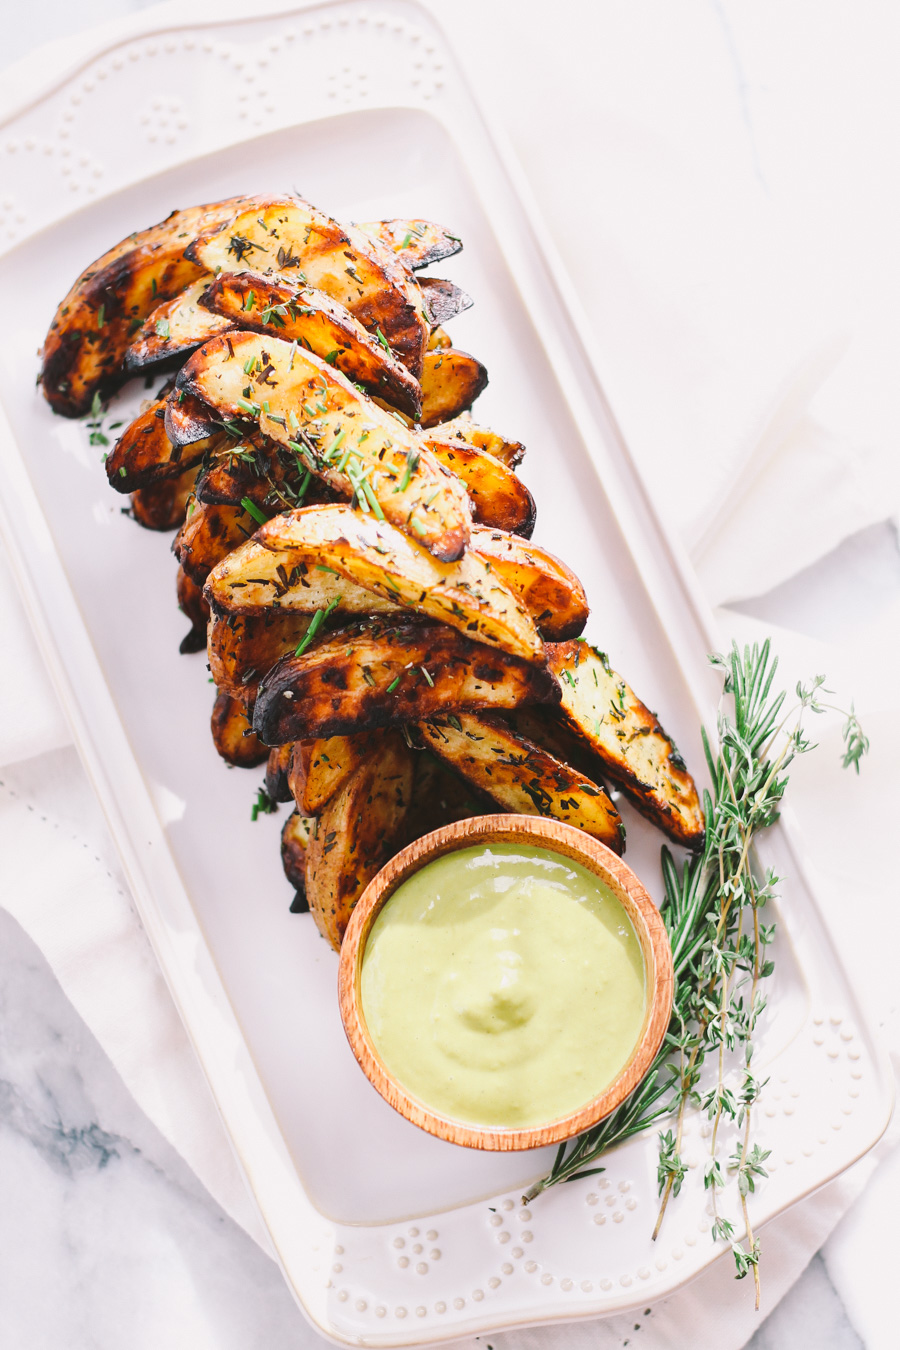 grilled fries with fresh herbs & lemon pesto aioli via playswellwithbutter.com